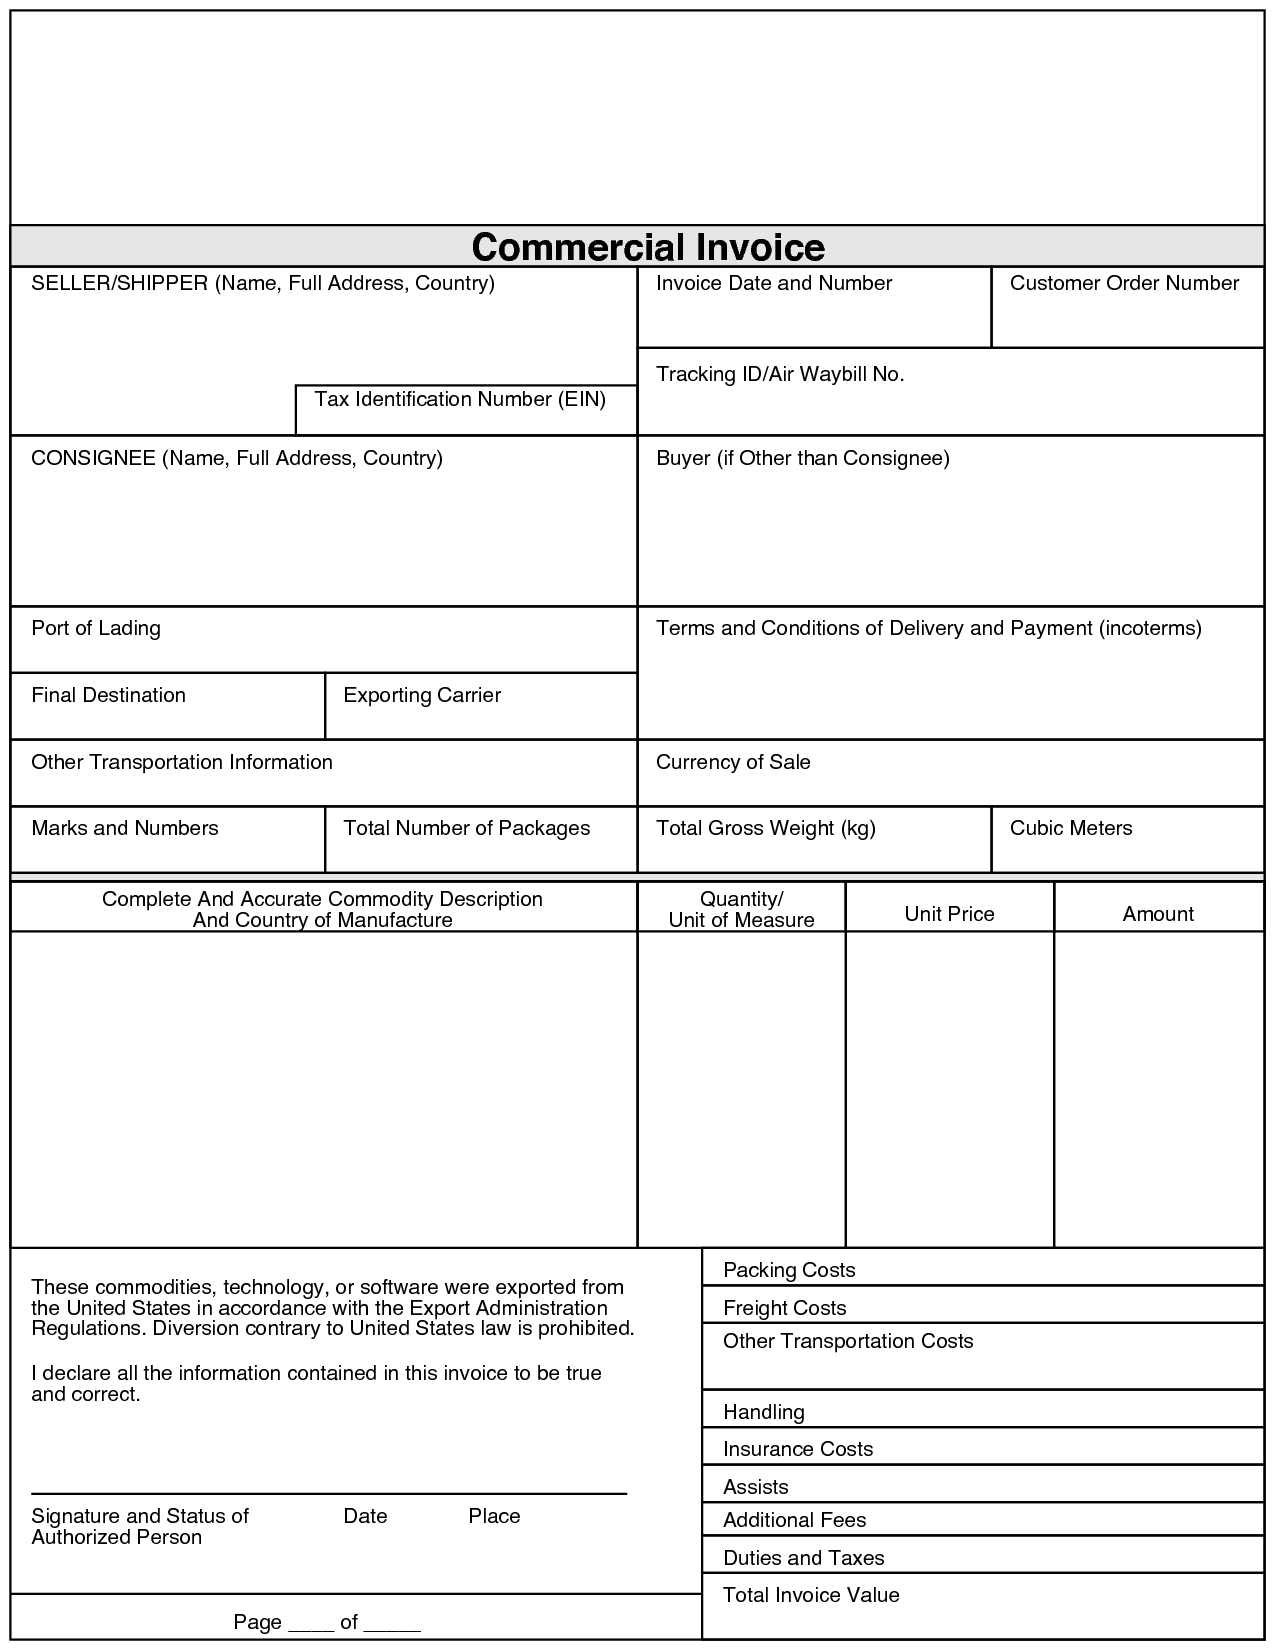 free commercial invoice template invoice style rental1 printed commercial invoice pdf